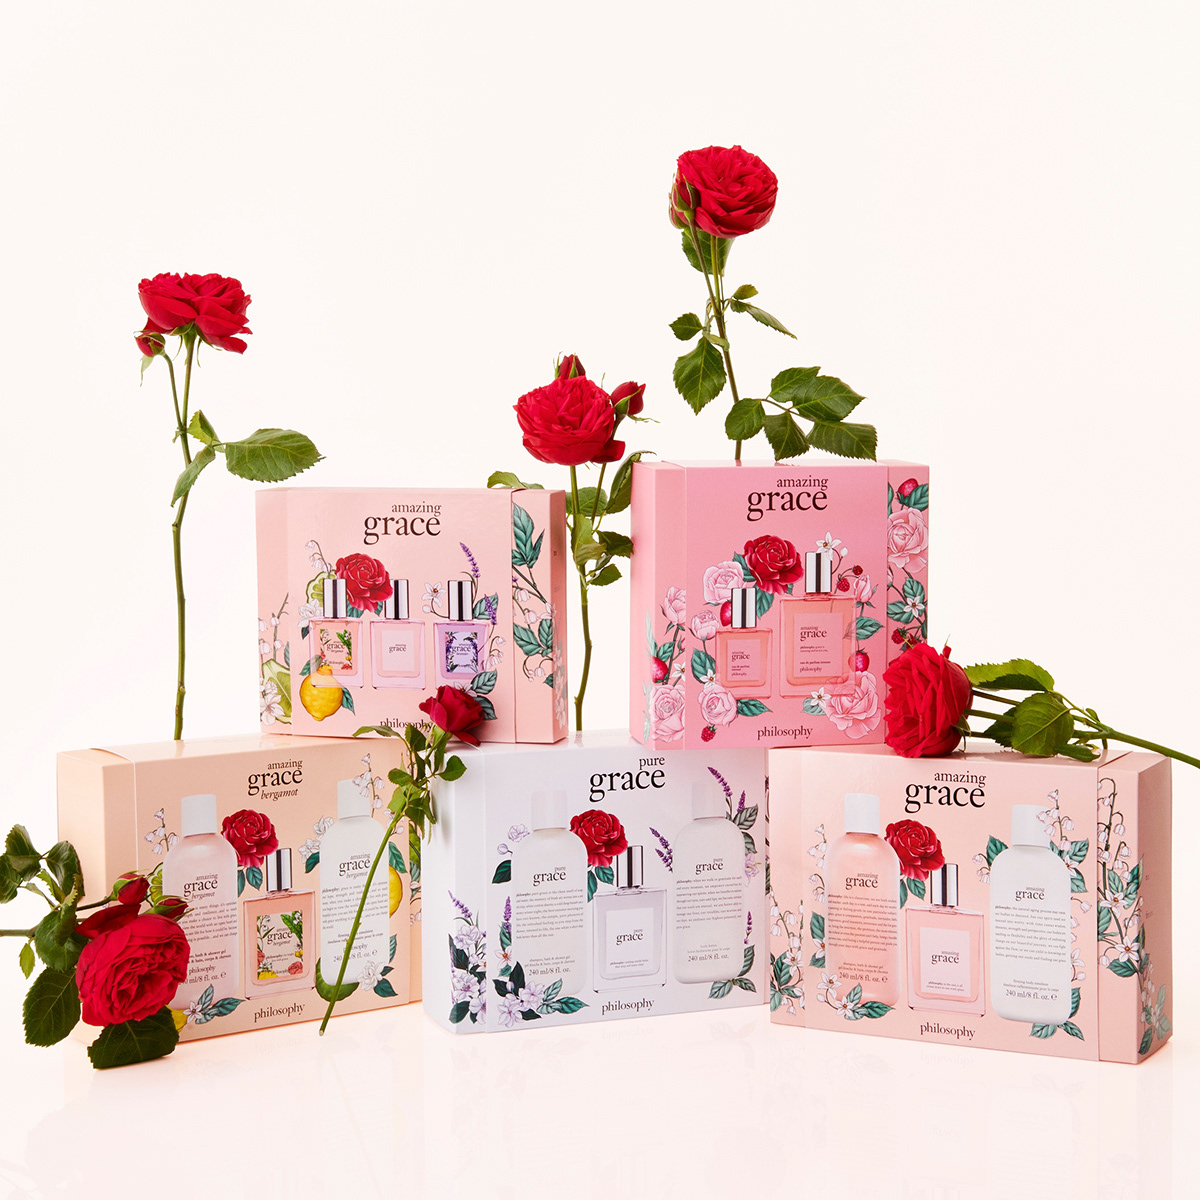 Image of Botanical illustrations on cosmetic packaging for Philosophy